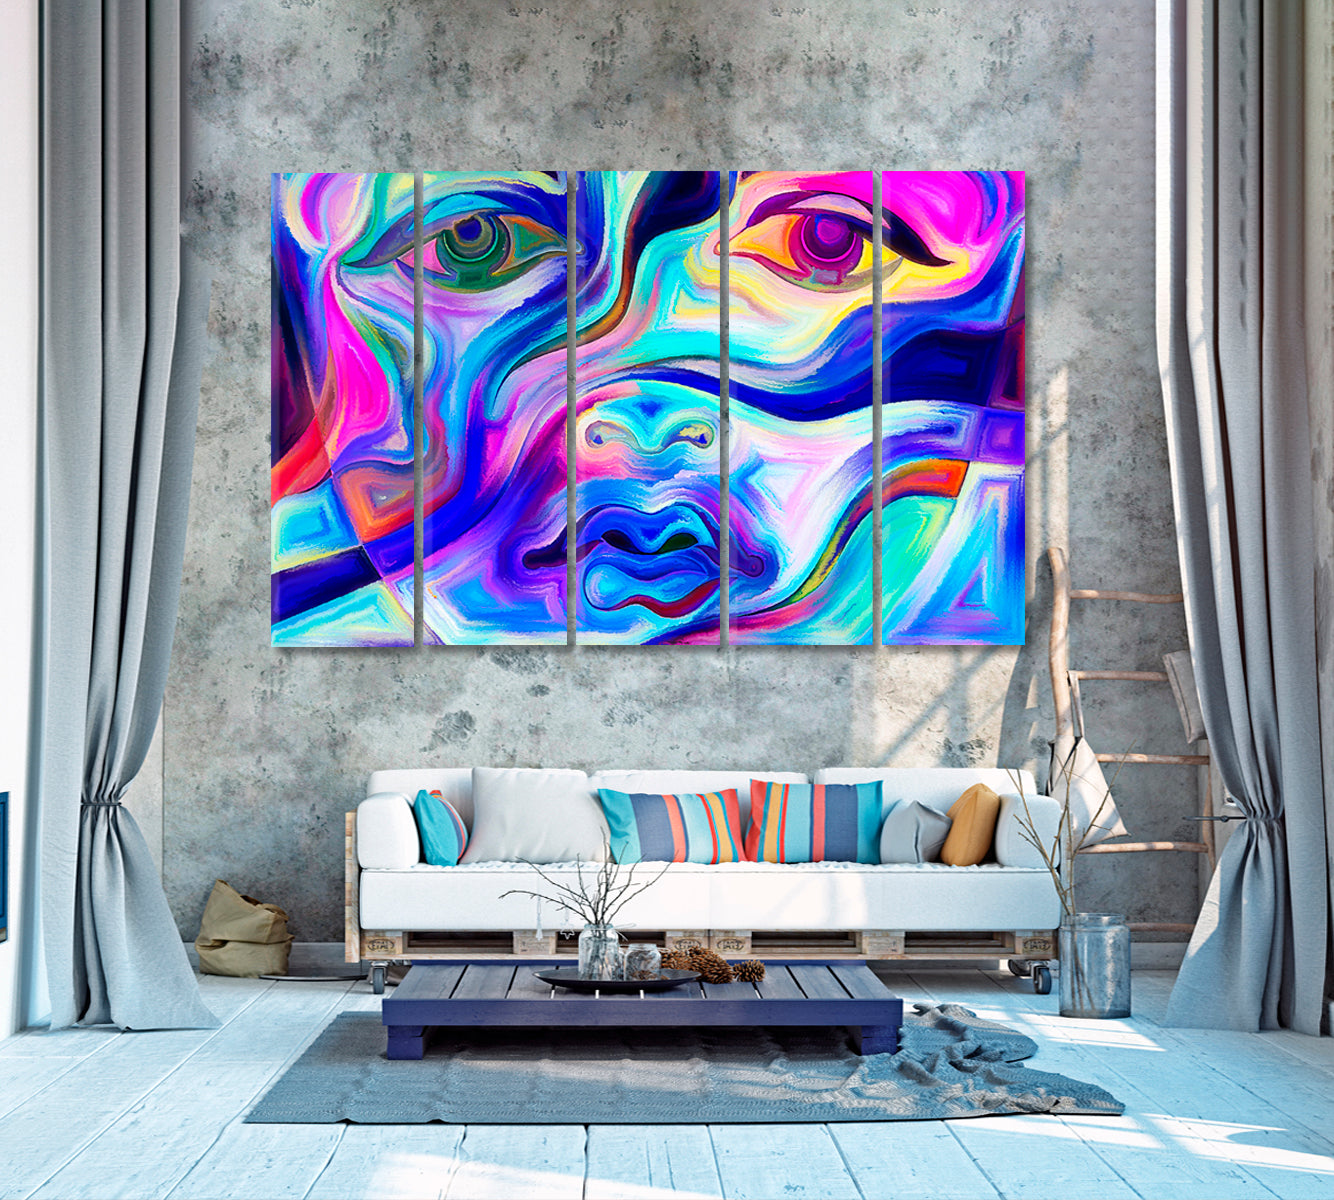 Vivid Frame of Mind Abstract Face Contemporary Art Artesty 5 panels 36" x 24" 